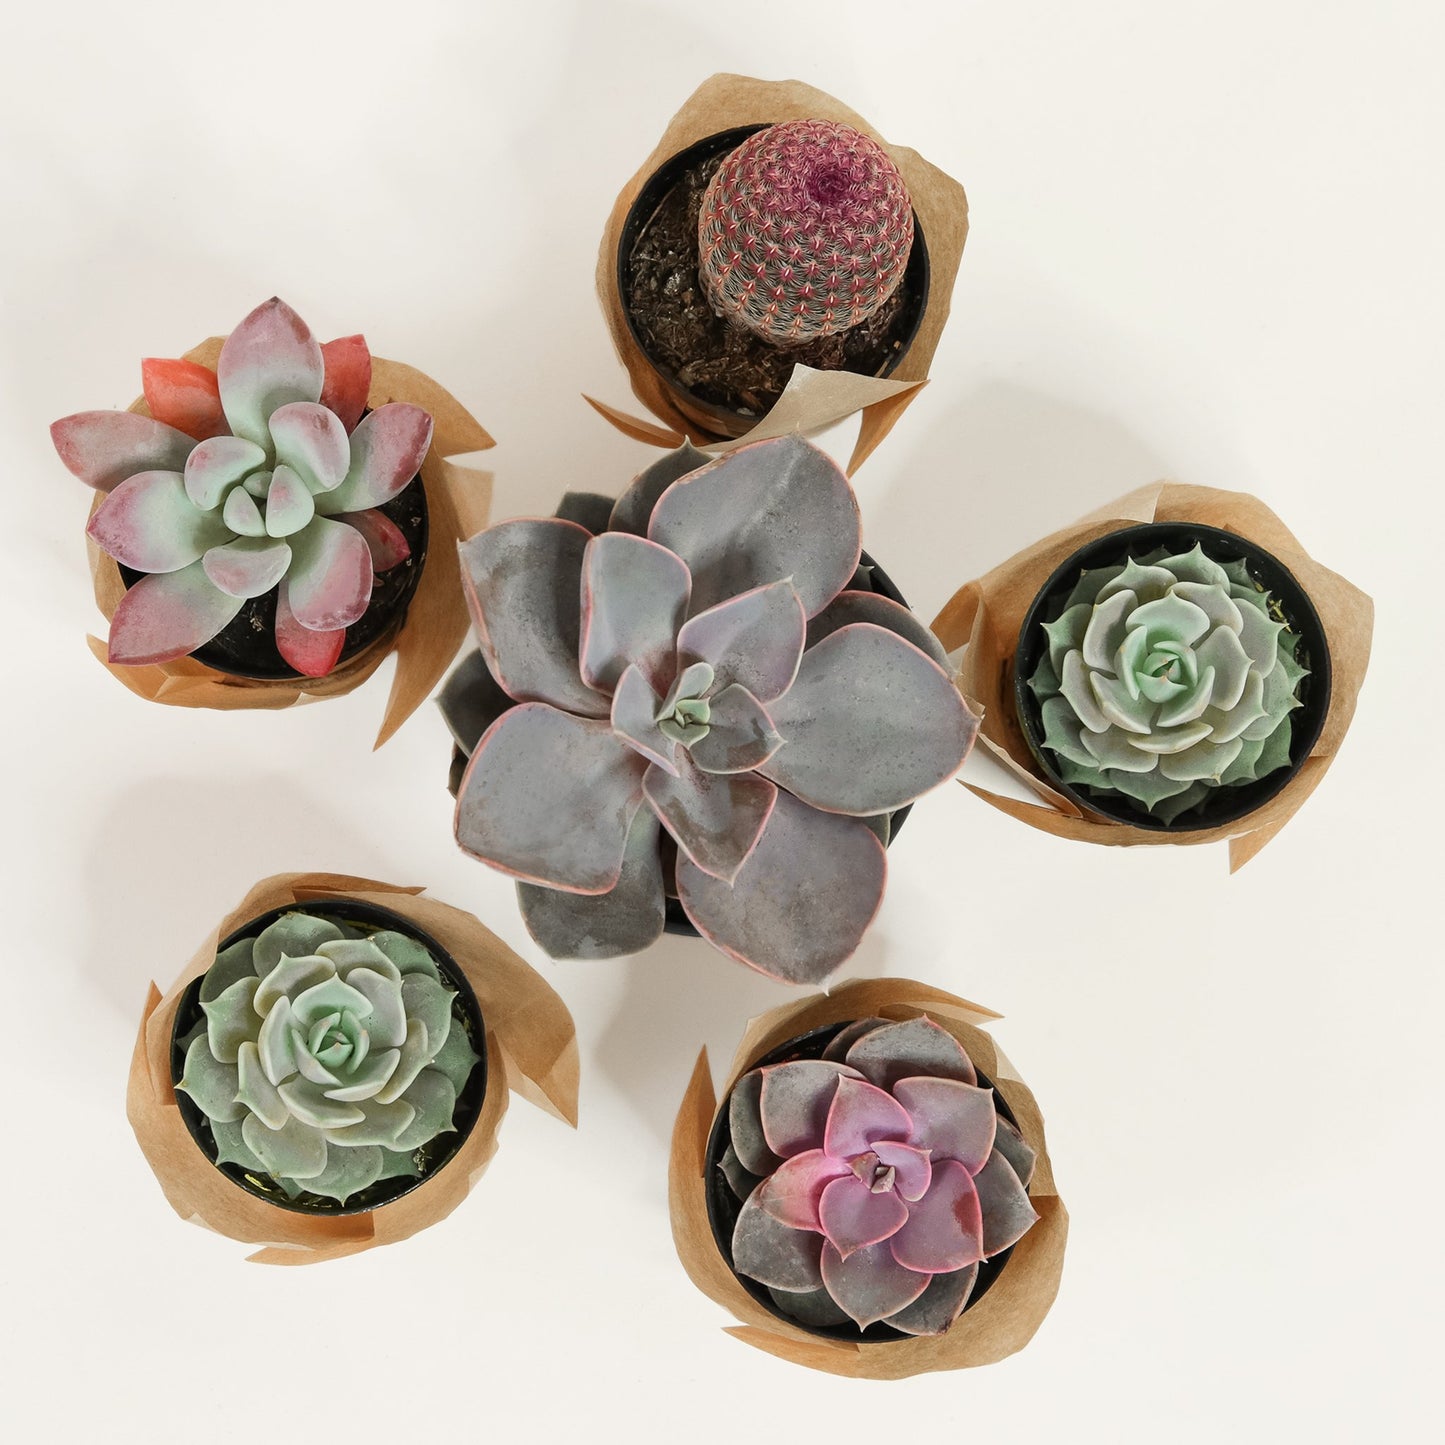 Five individual, 2 inch succulents of various shapes and sizes, along with one larger succulent picked for the large spring kit. Each succulent container is wrapped in brown craft paper.